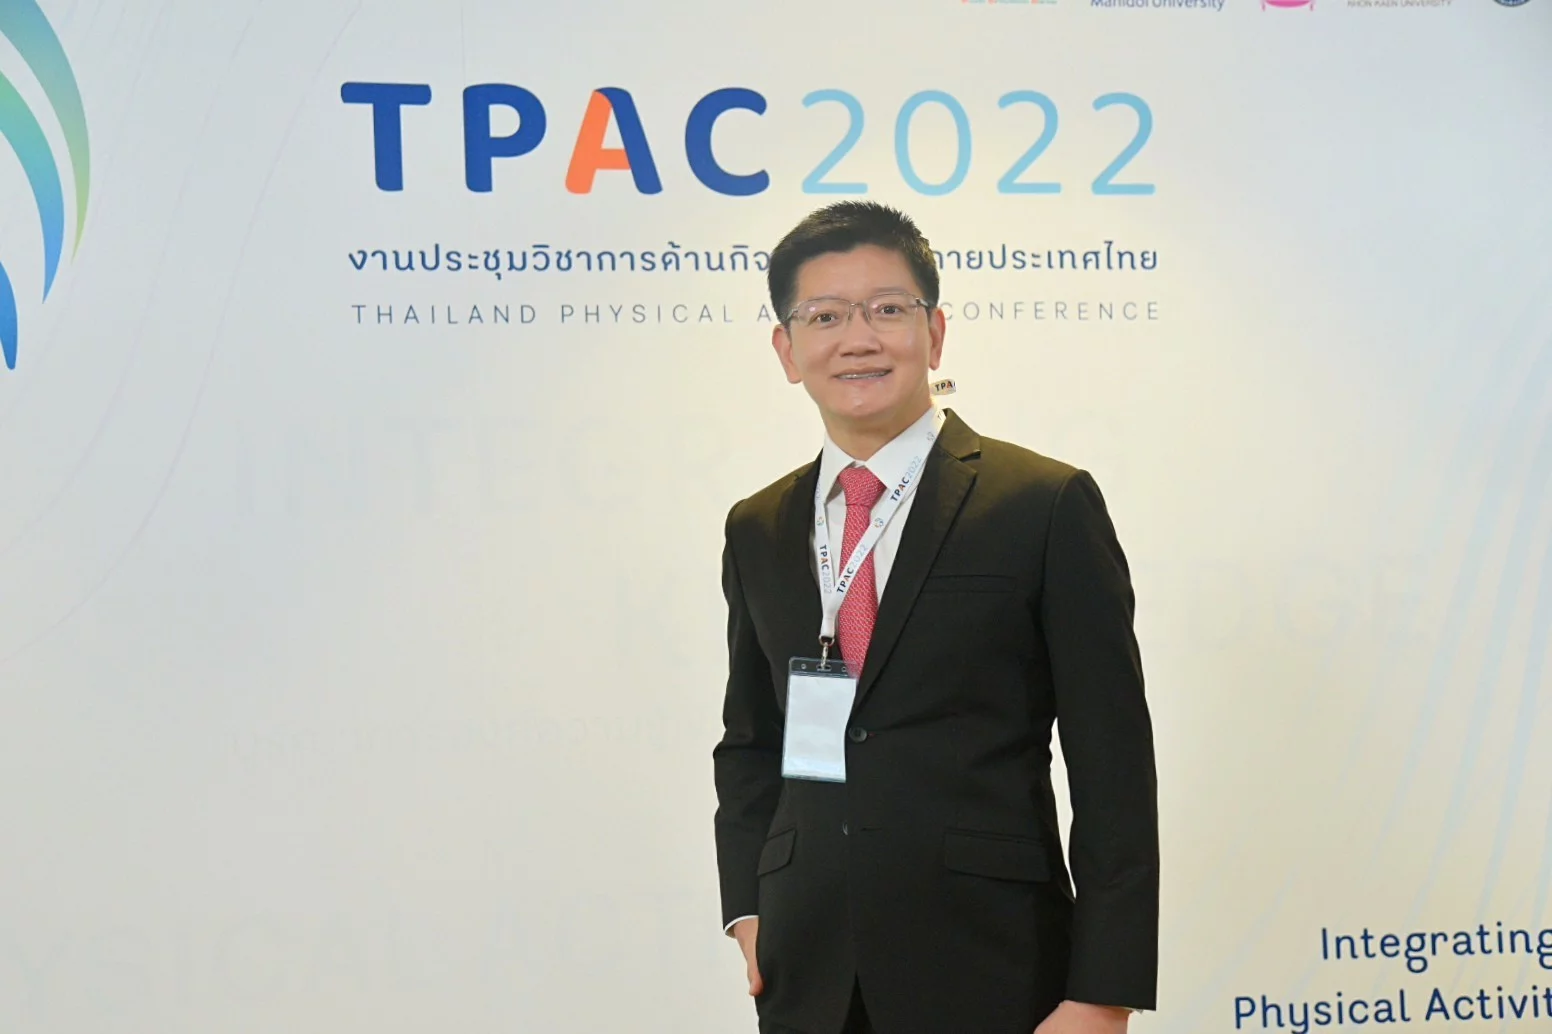 ThaiHealth to promote good health through physical activities with “3 Actives” strategy thaihealth